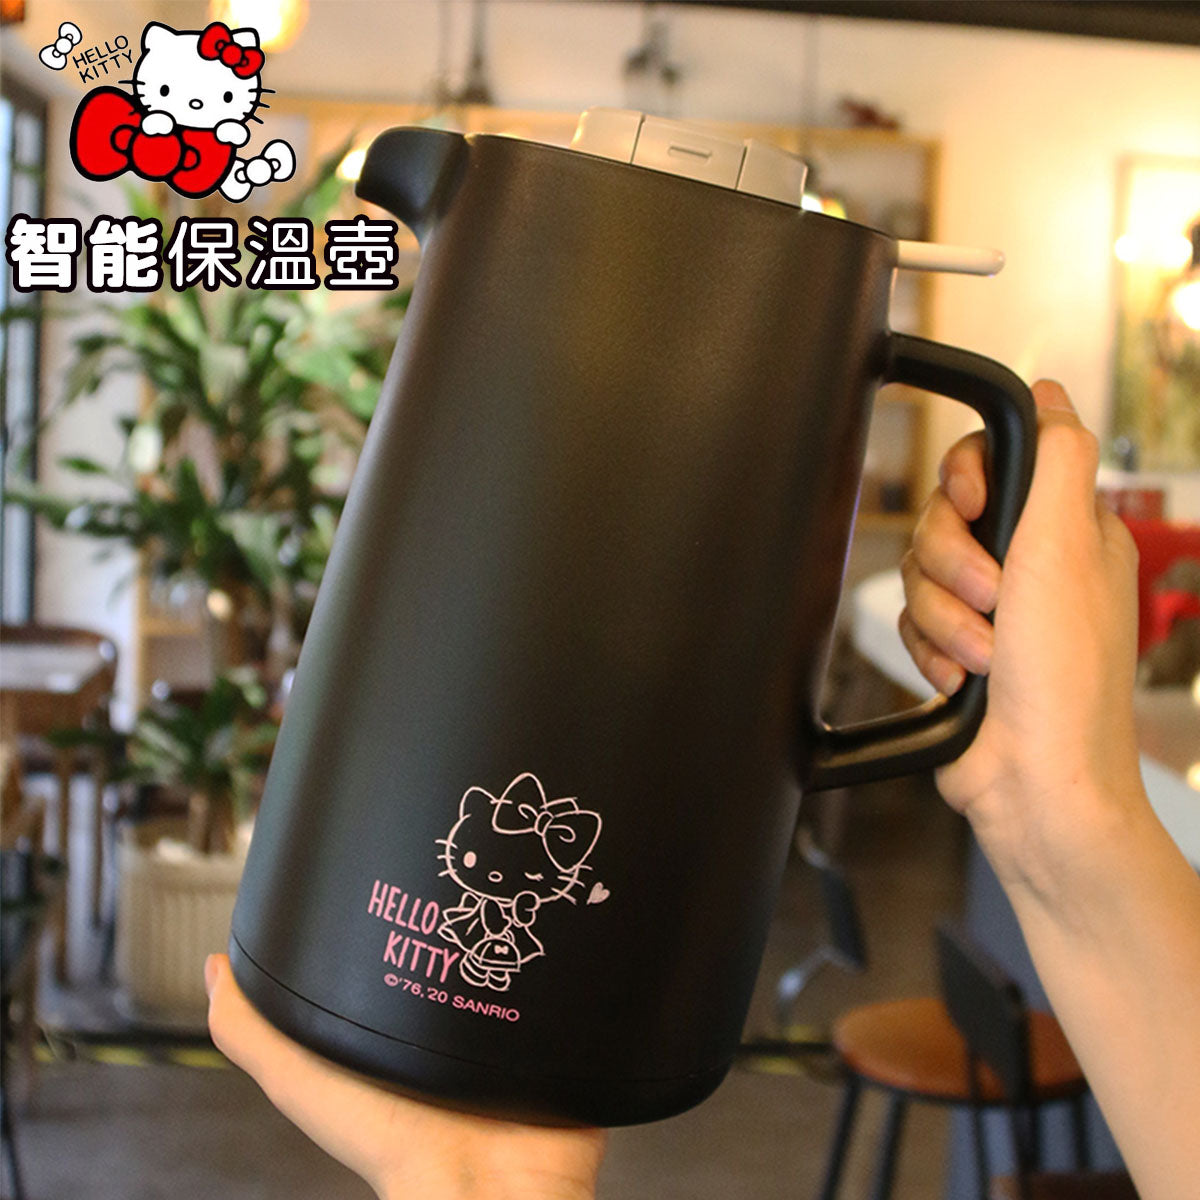 Thermo Kettle Hello Kitty 1.5L